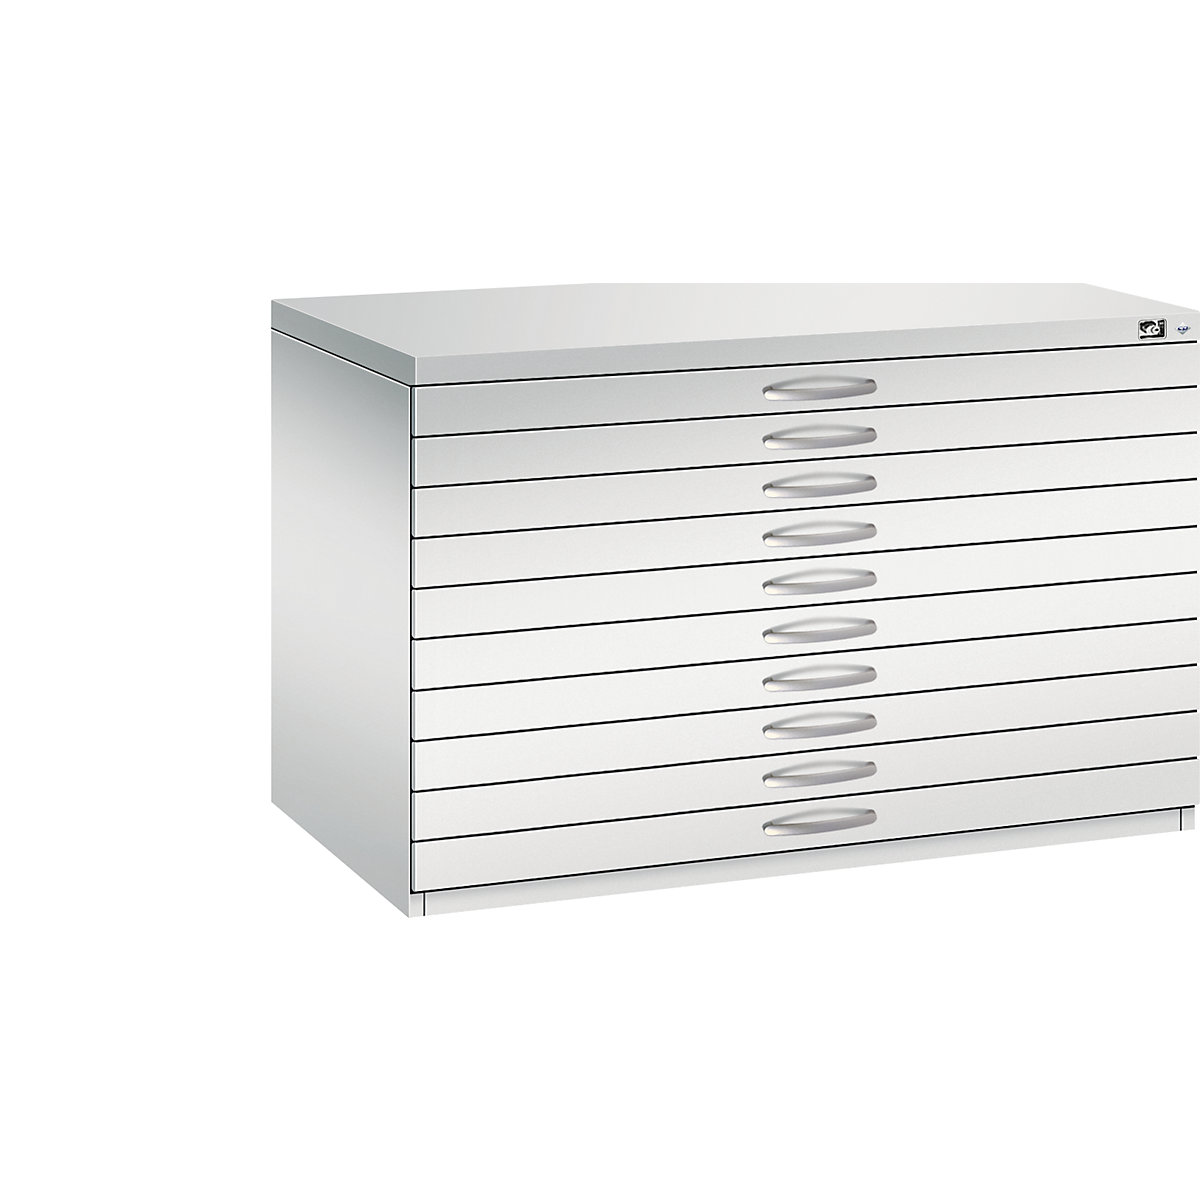 Drawing cabinet – C+P, A1, 10 drawers, height 760 mm, light grey-20